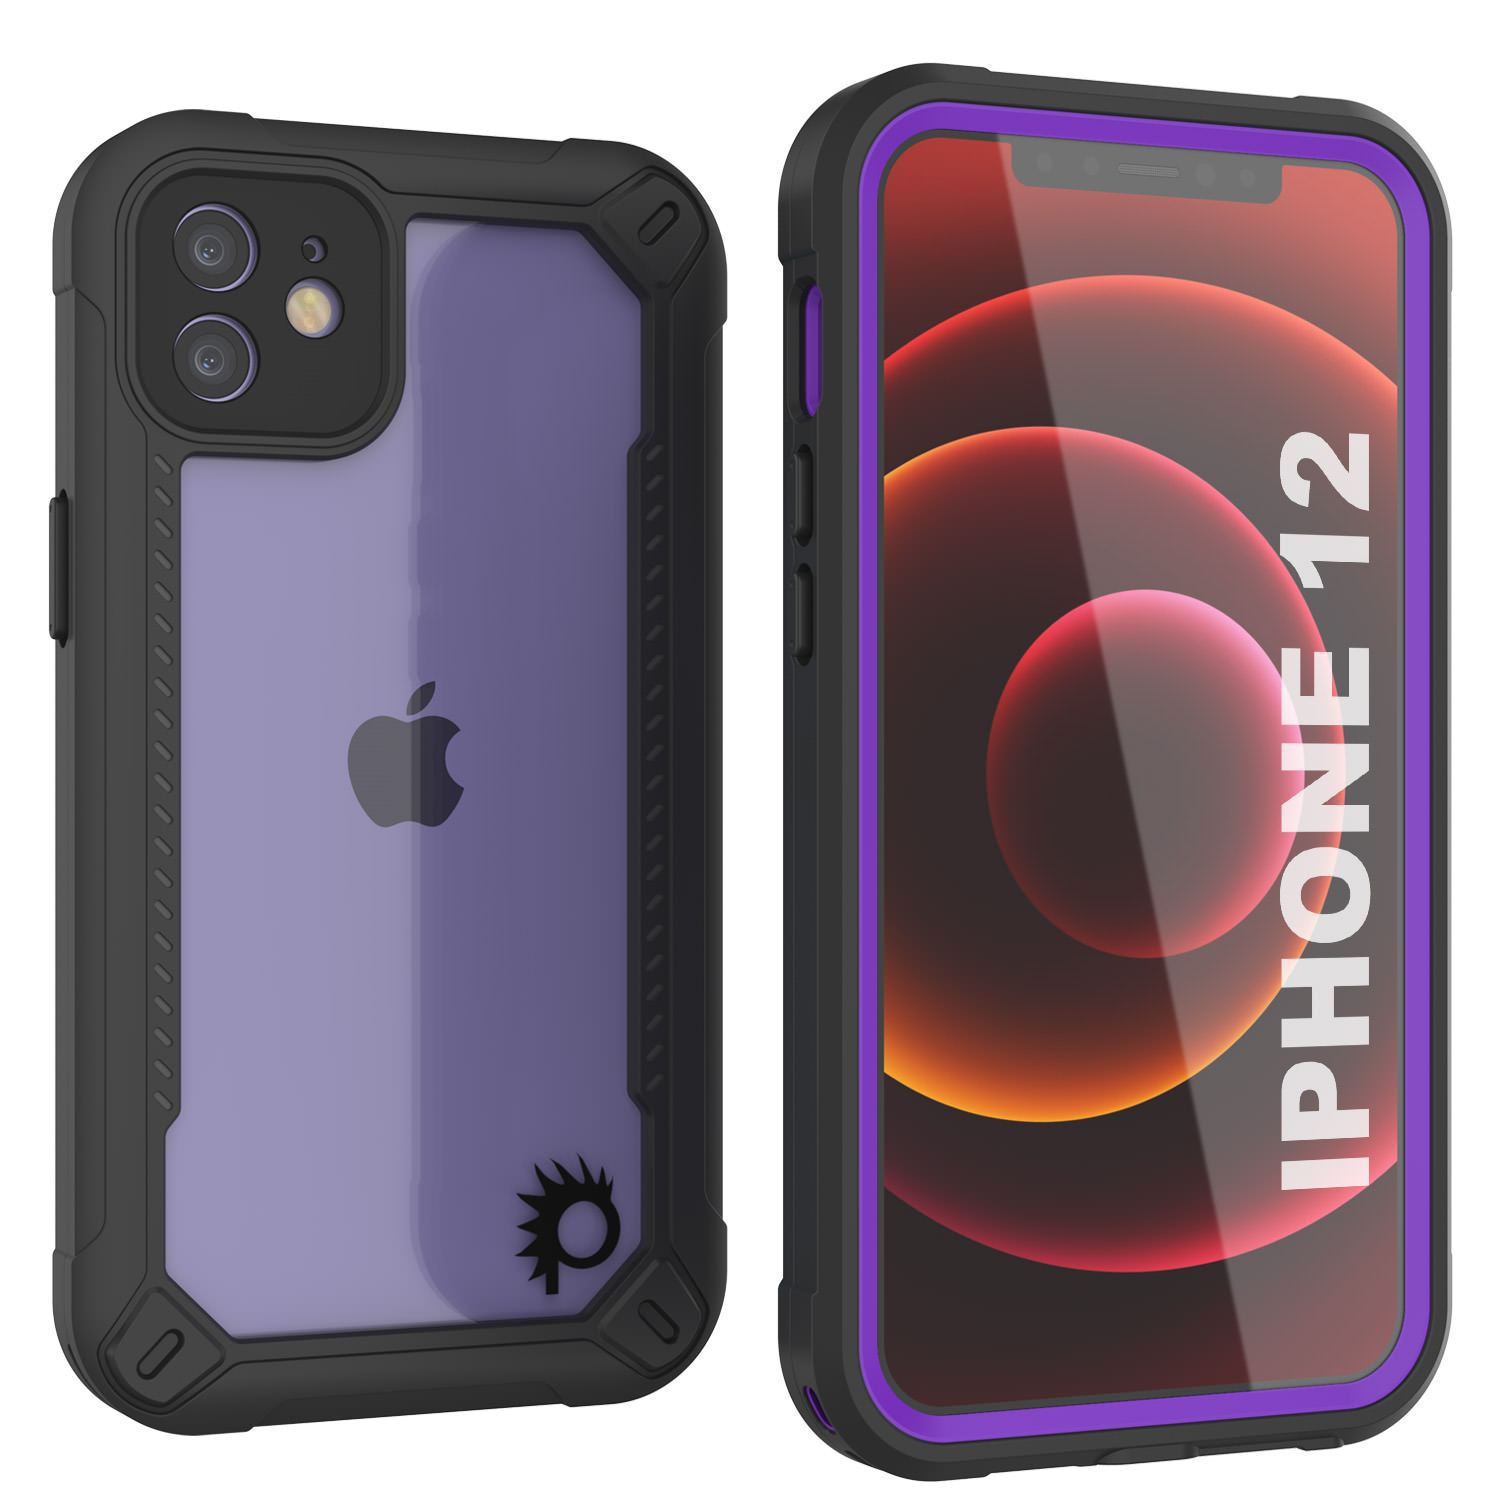 iPhone 12 Waterproof IP68 Case, Punkcase [Purple]  [Maximus Series] [Slim Fit] [IP68 Certified] [Shockresistant] Clear Armor Cover with Screen Protector | Ultimate Protection (Color in image: purple)